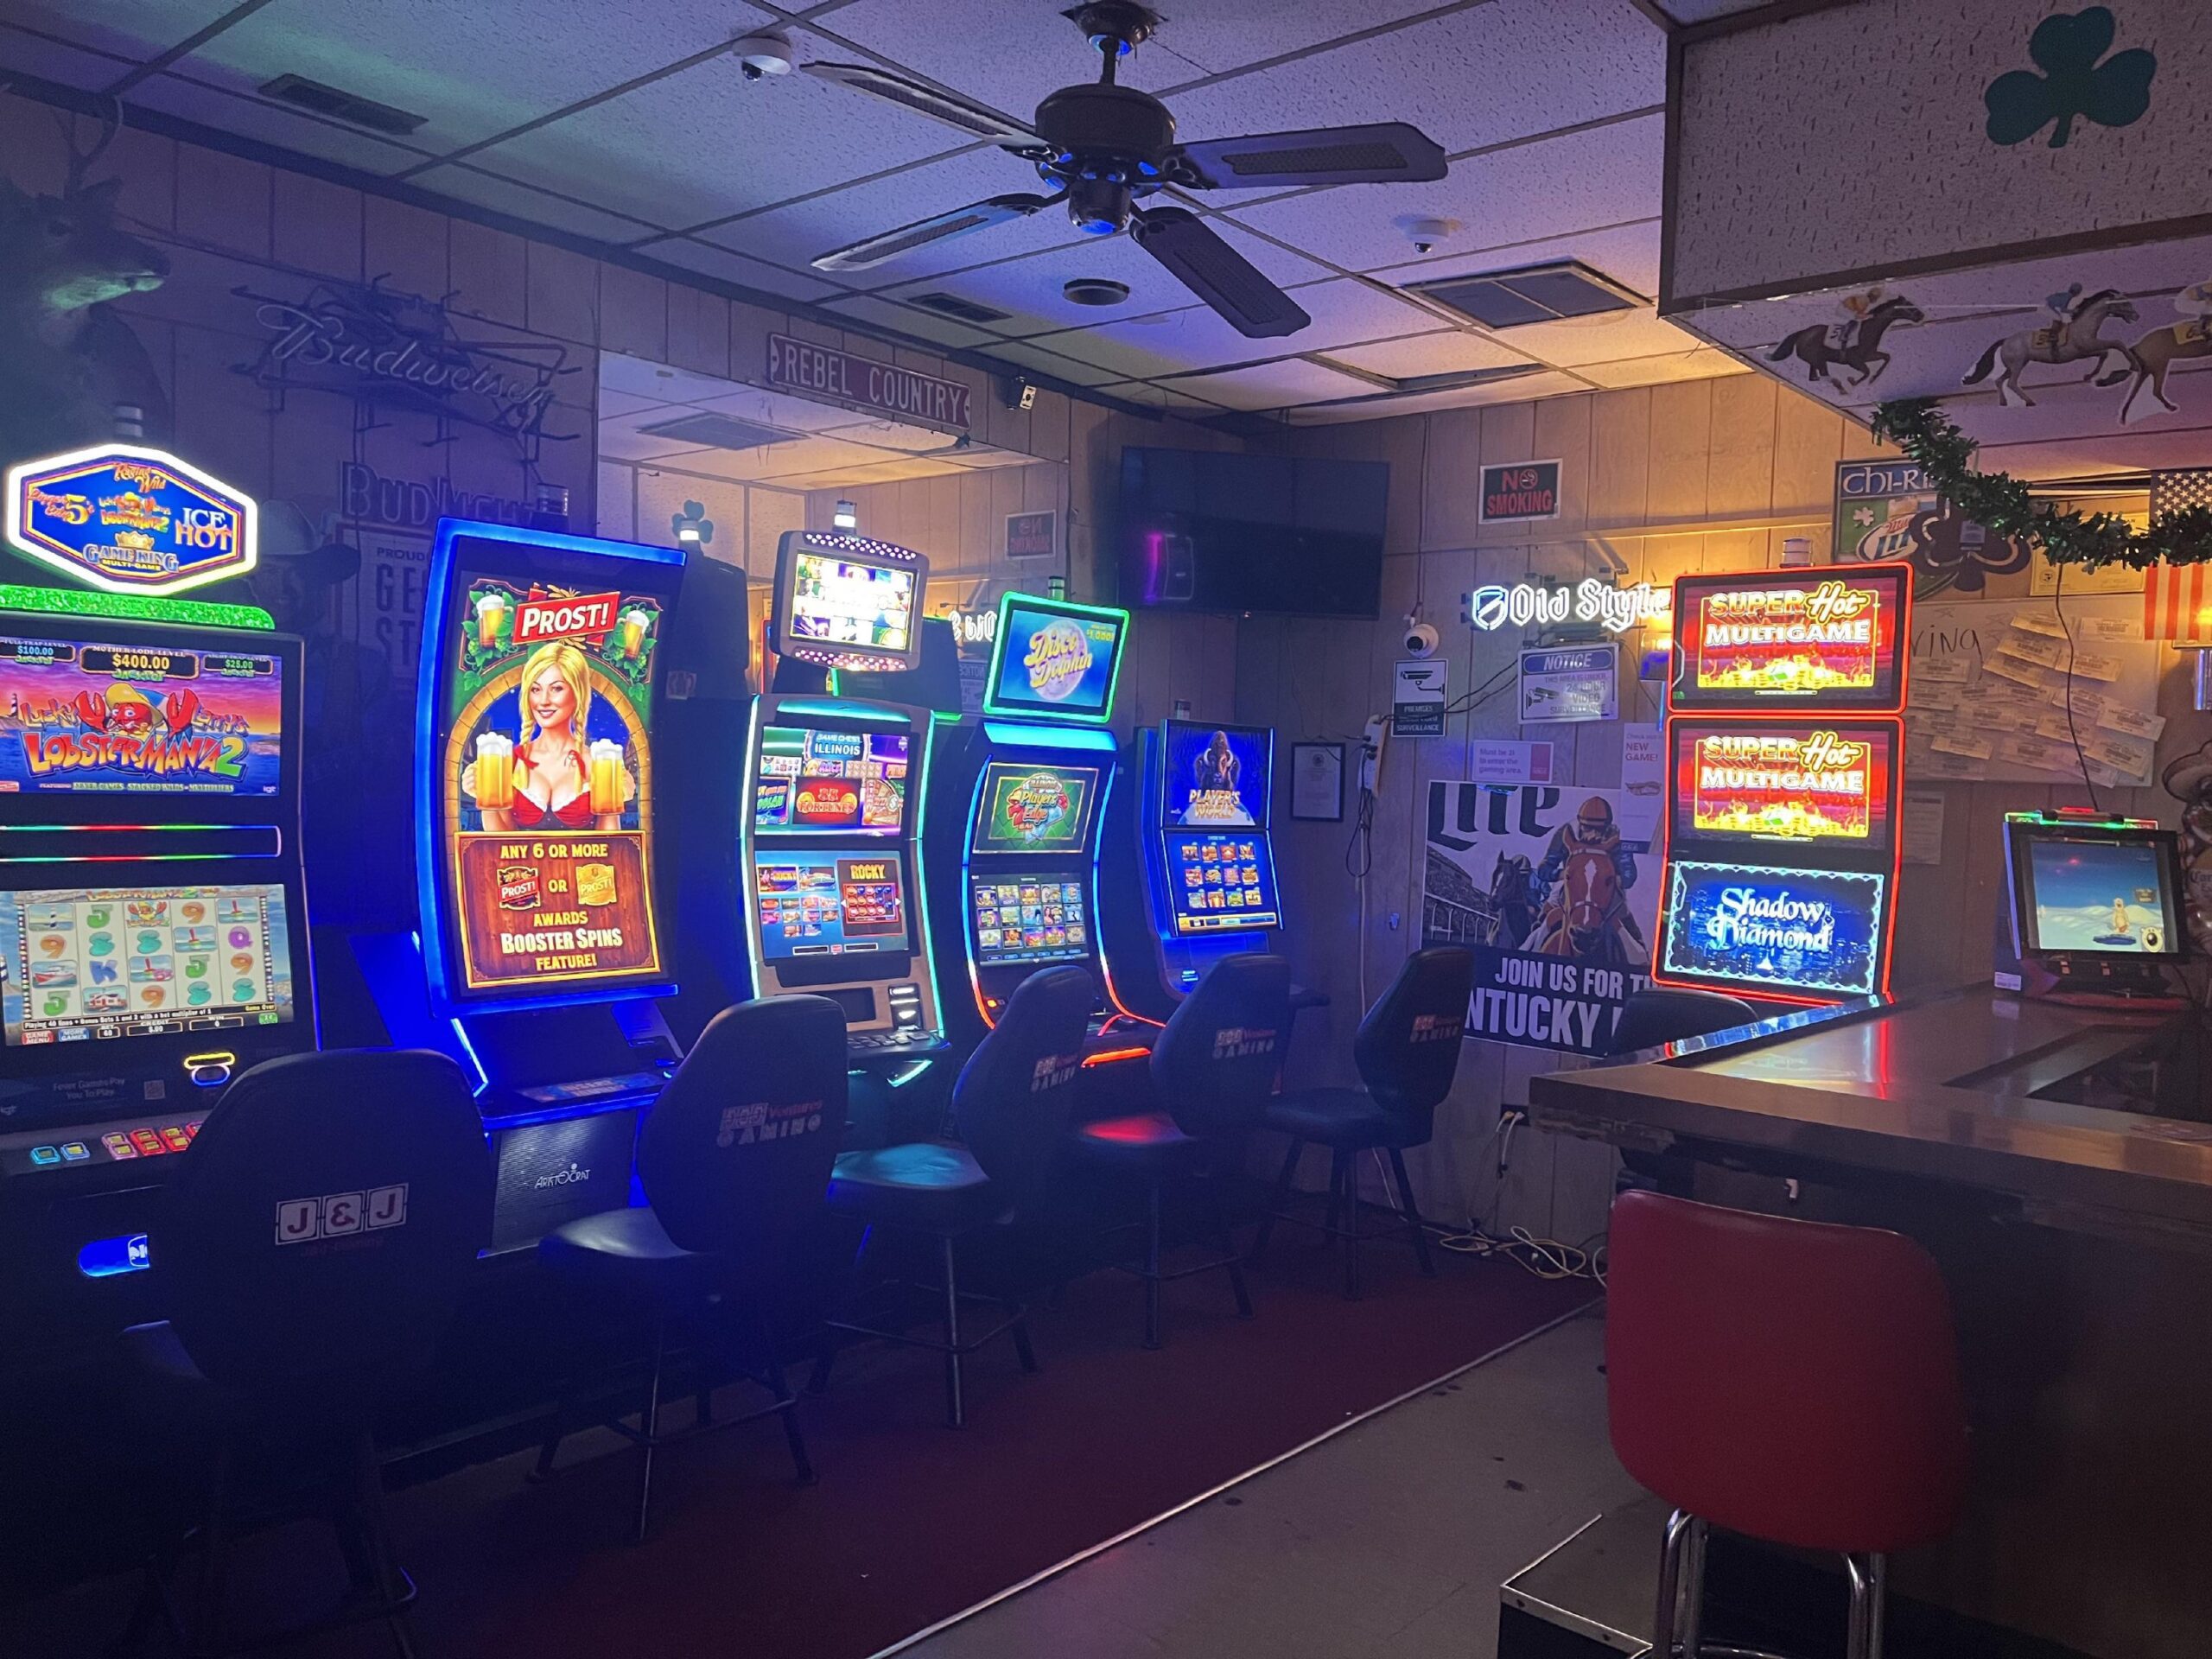 Video Gaming in Palatine, IL